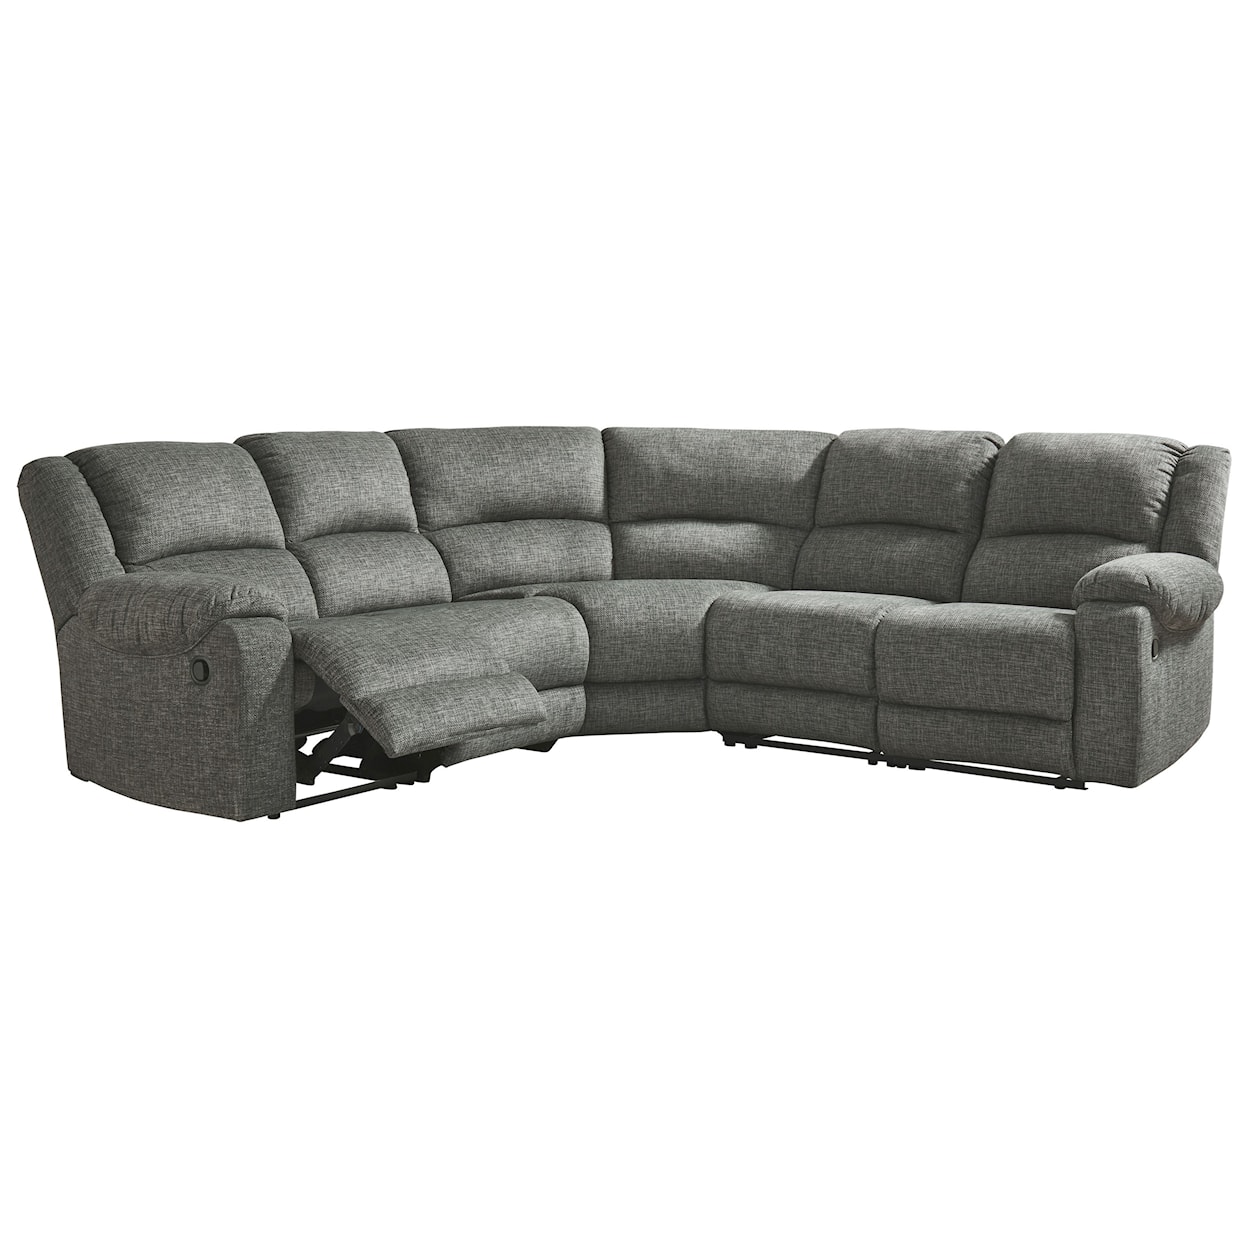 Signature Design by Ashley Goalie 5-Piece Reclining Sectional